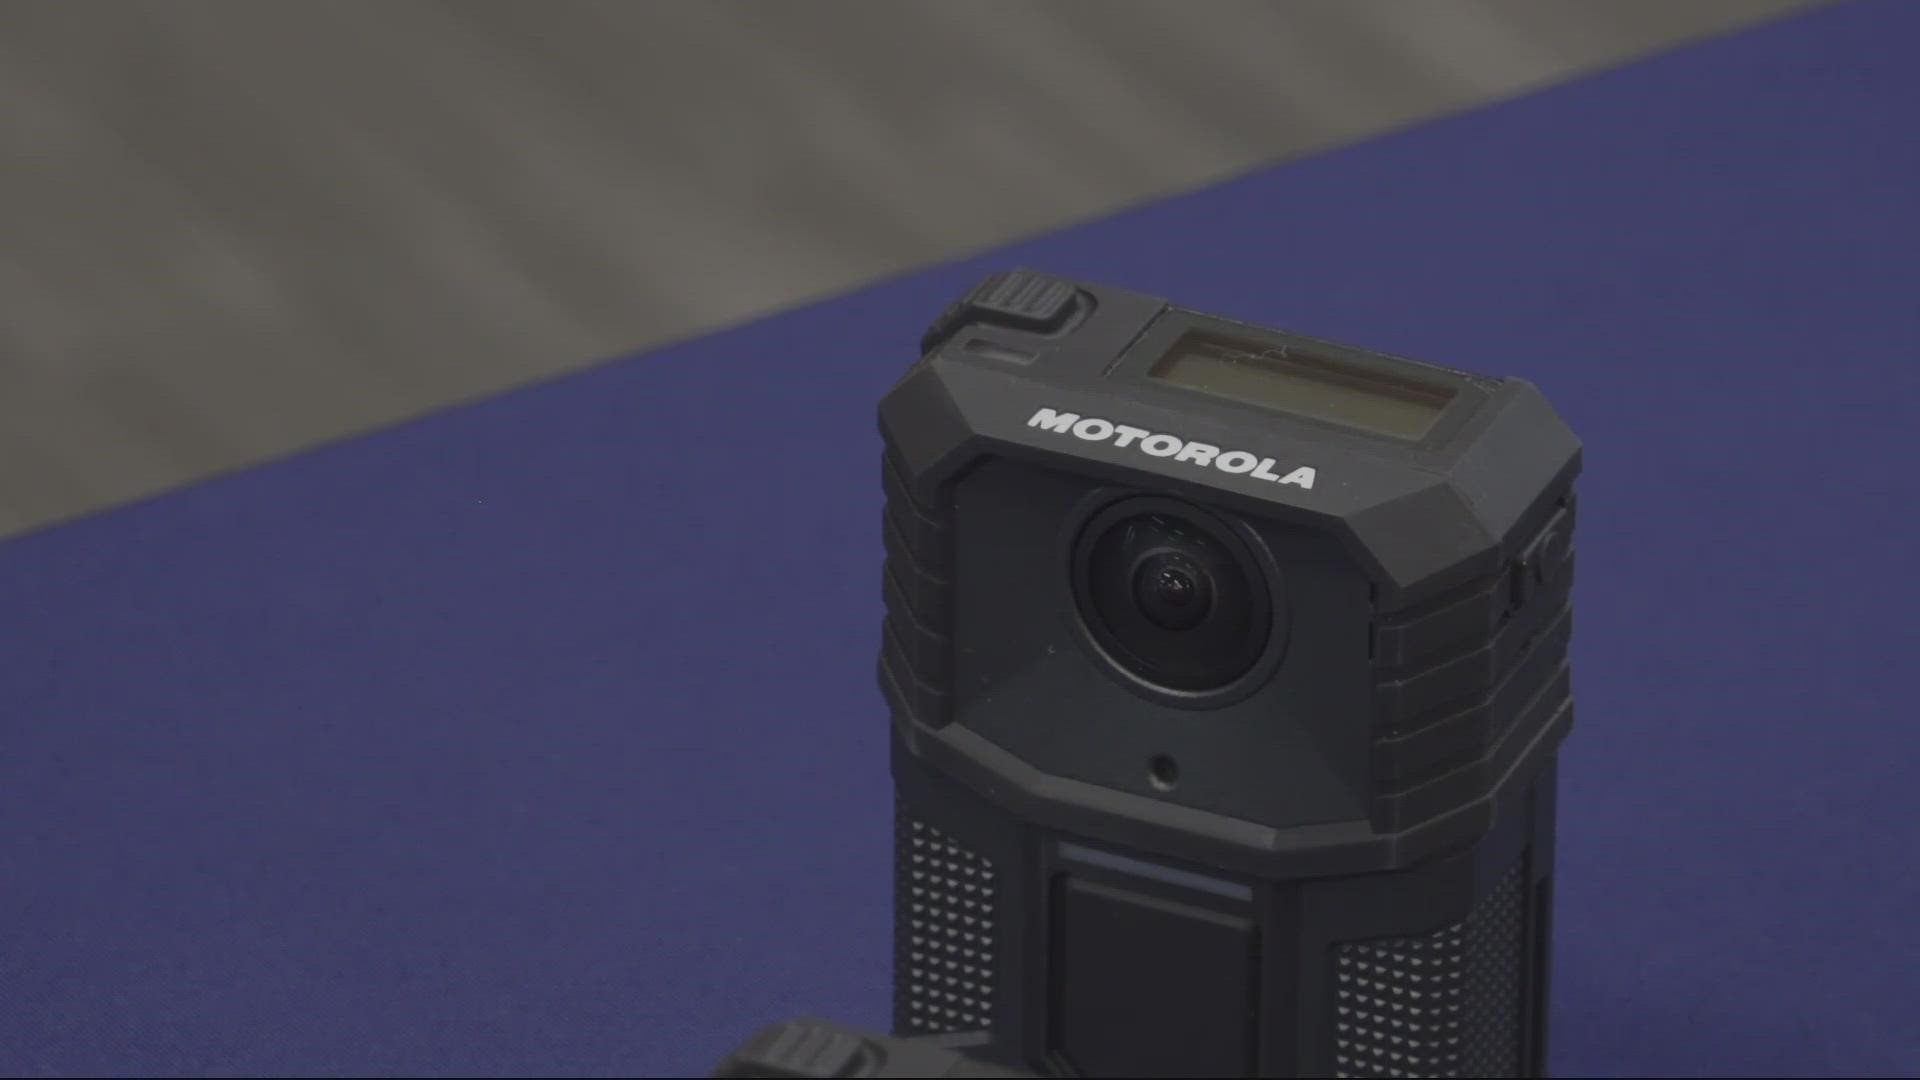 Starting Monday, all Salem police officers will be wearing body cameras in hopes of building more transparency and accountability within the community.